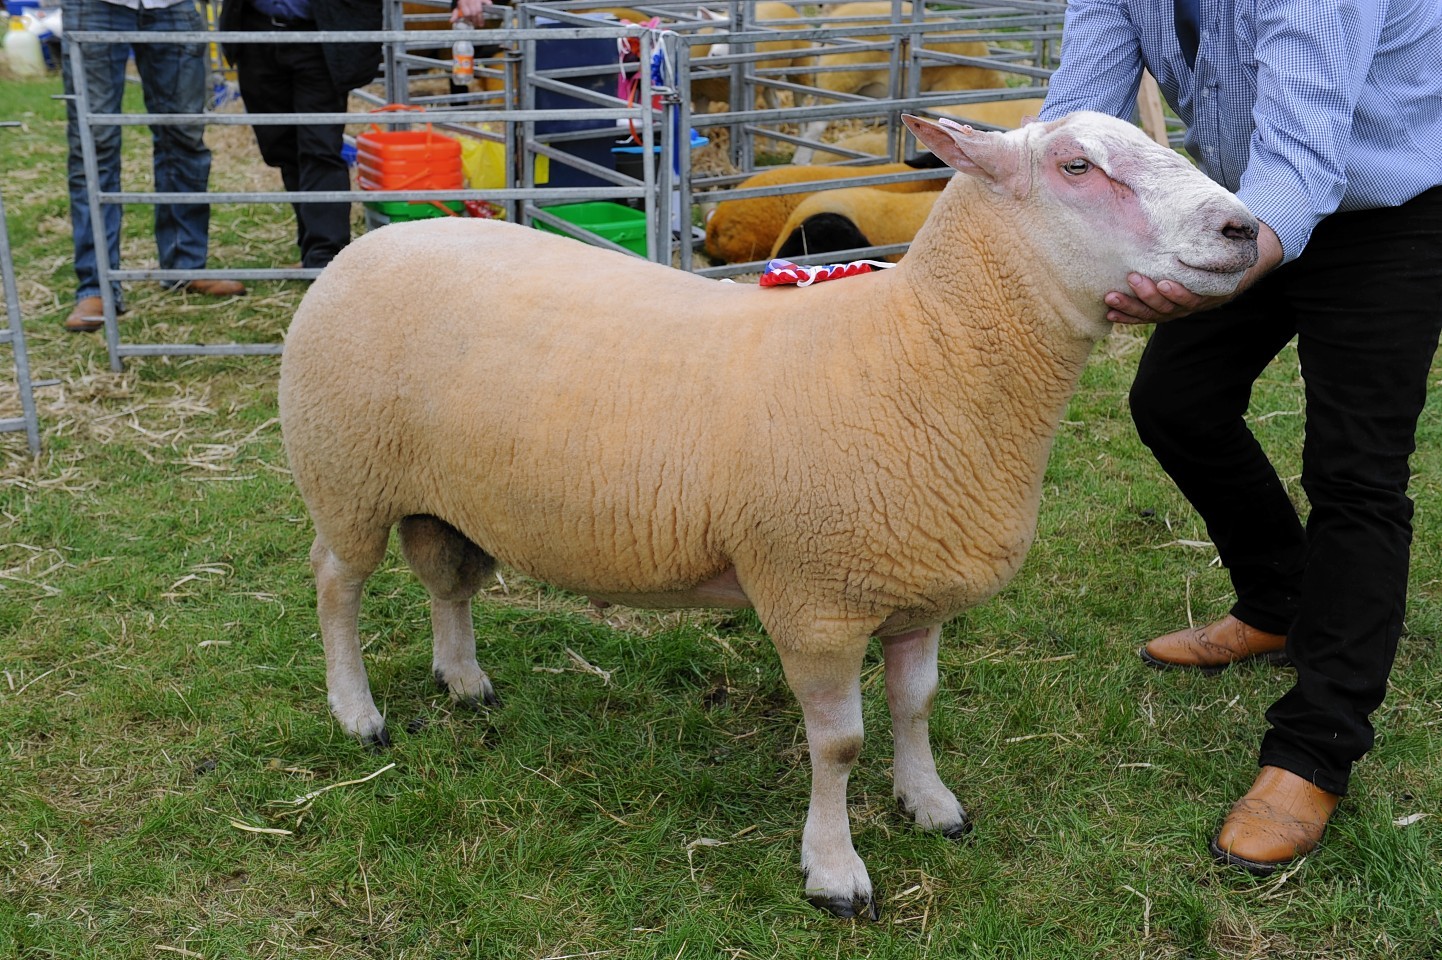 The overall sheep champion was the Any other breed champion